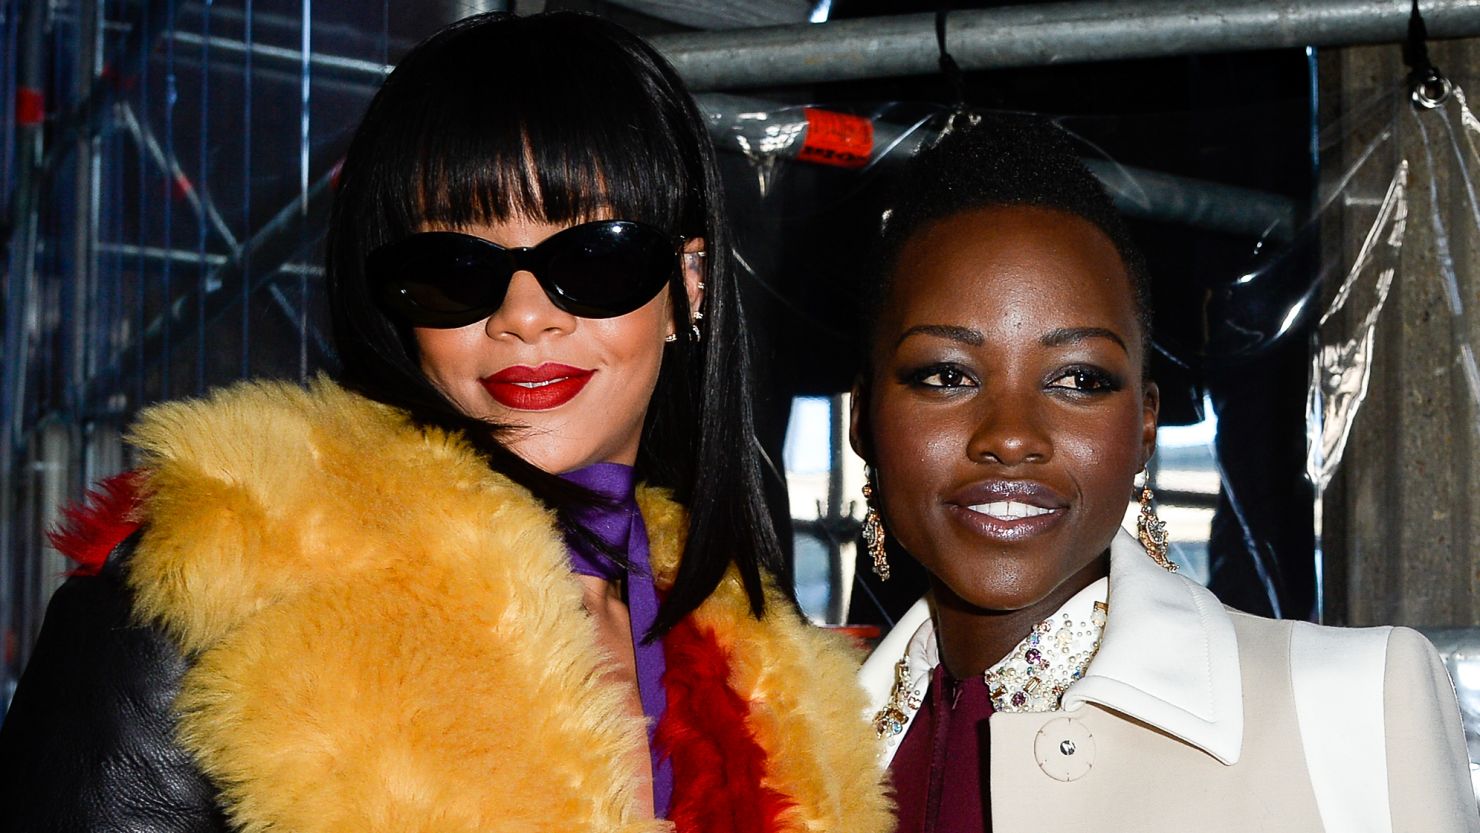  Lupita Nyong'o and singer Rihanna attend the Miu Miu show as part of the Paris Fashion Week Womenswear Fall/Winter 2014-2015 in March 2014 in Paris, France.